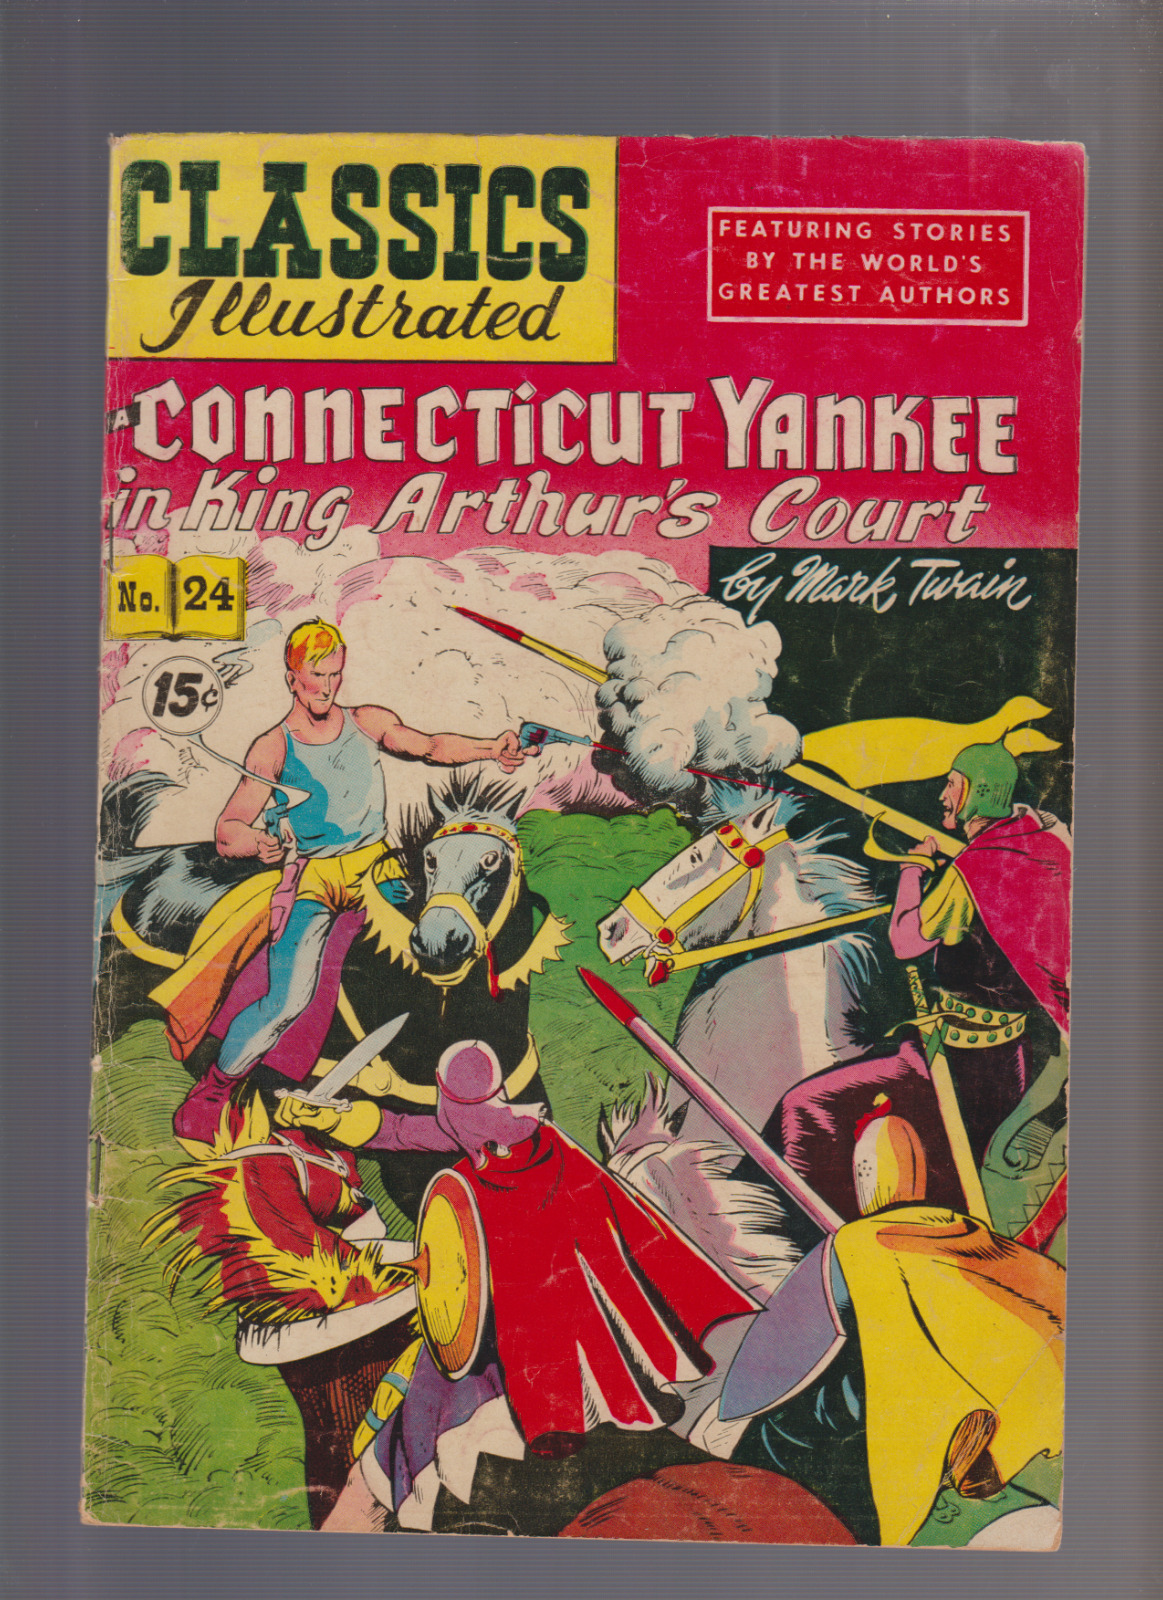 Classics Illustrated #24 (HRN 87) Connecticut Yankee In King Arthur's Court